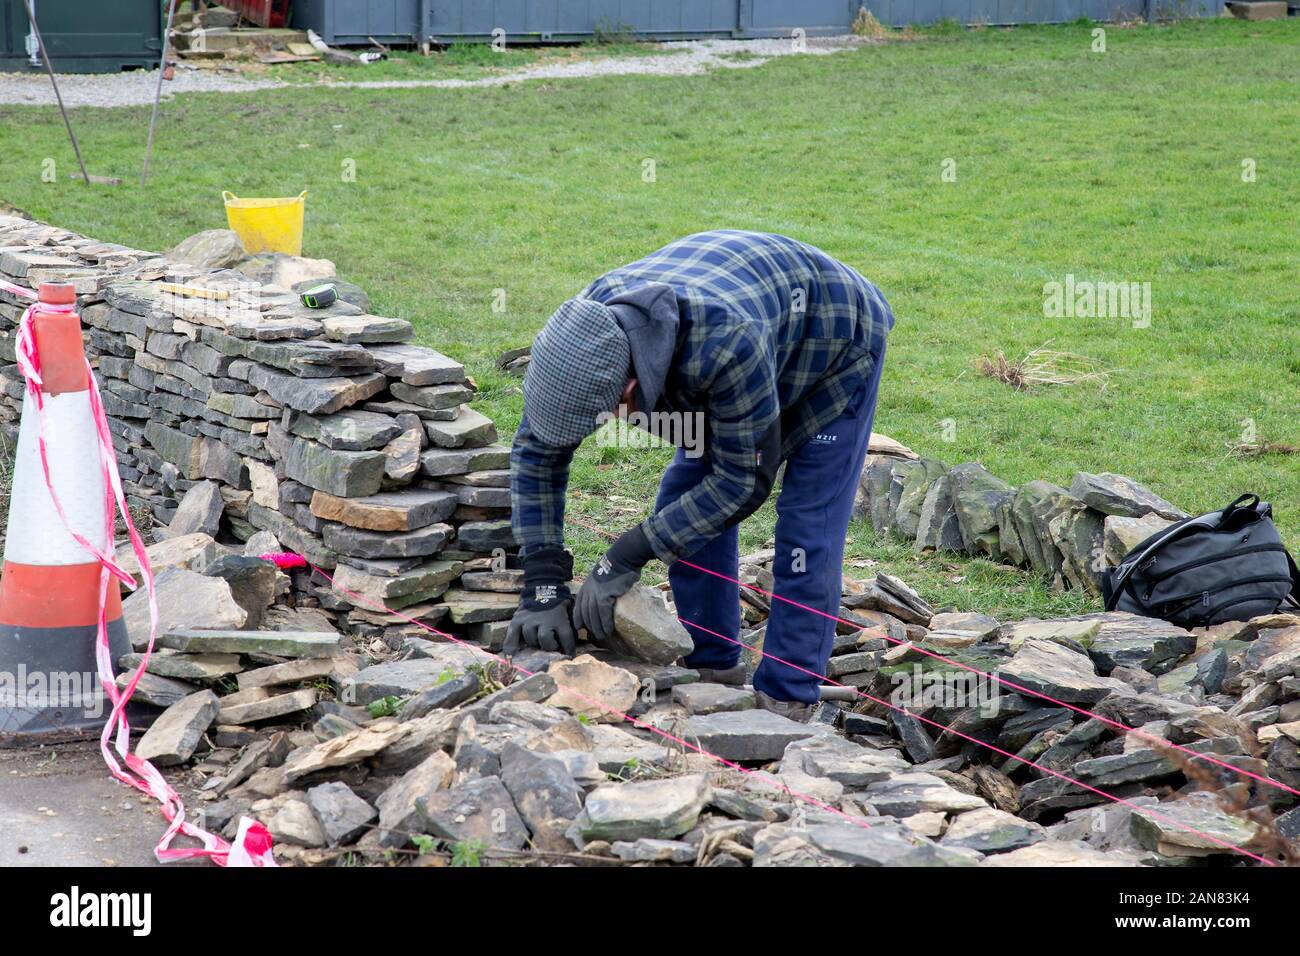 A dry stone wall craftsman restoring a dilapidated wall to its former glory on the boundary of a sports field in West Yorkshire, England U.K. Stock Photo